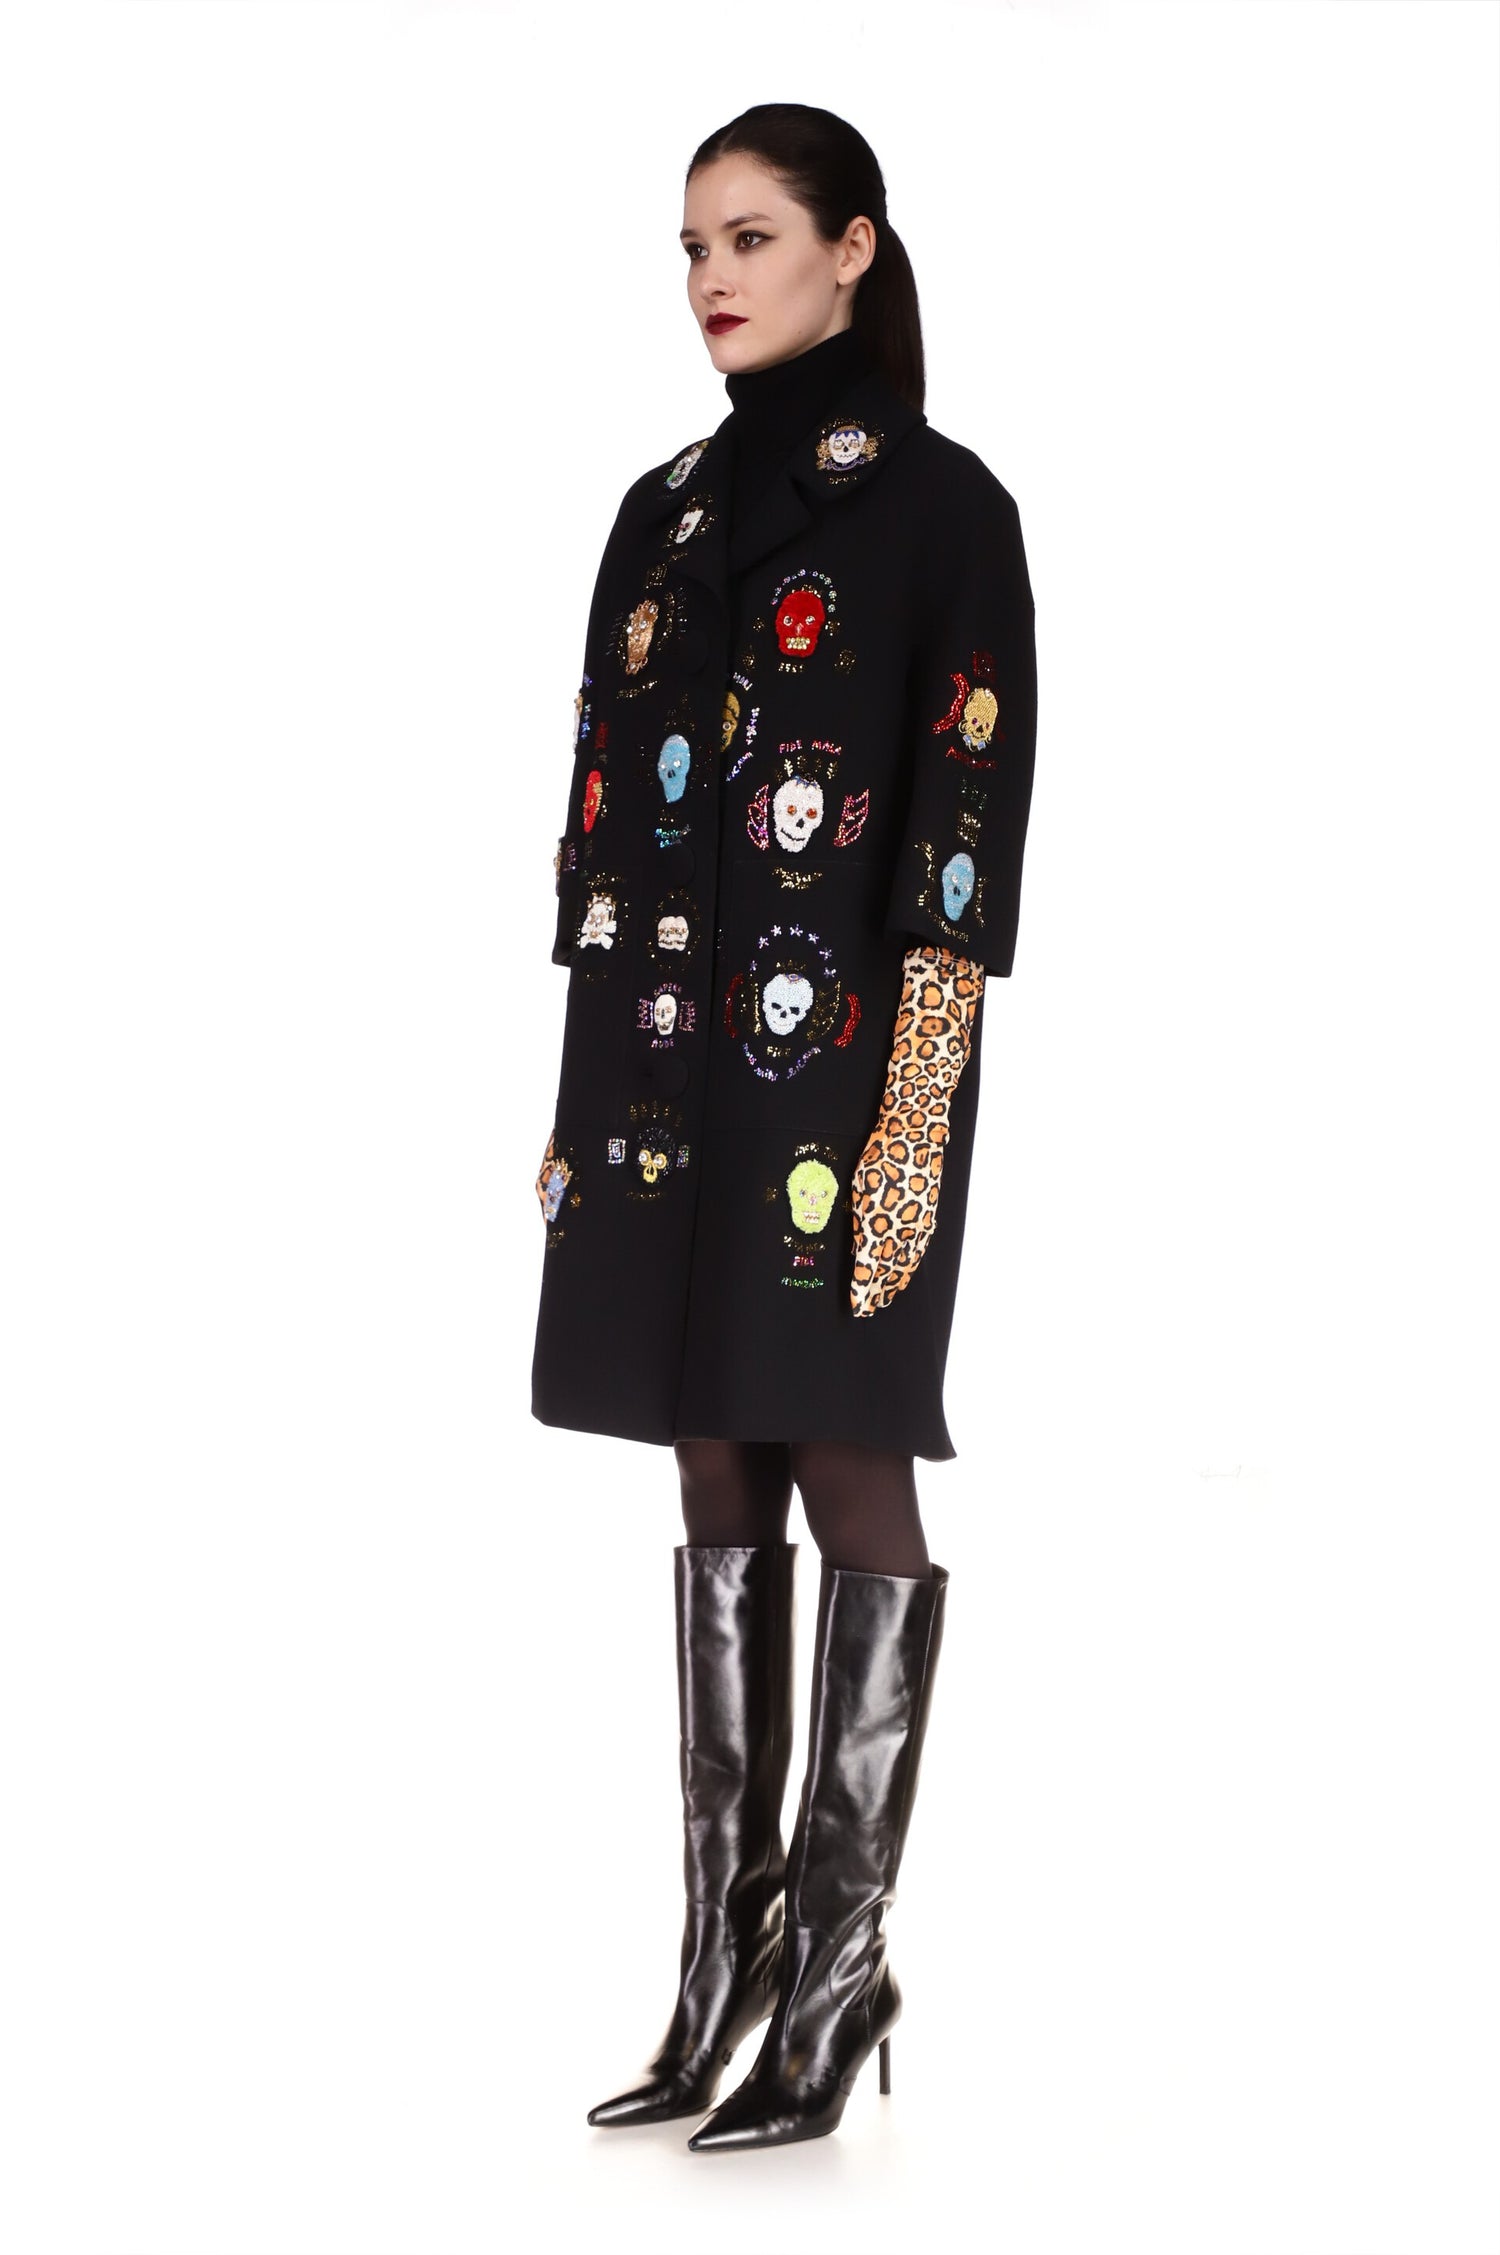 'WE ARE MADE OF STARS' PATCH POCKET COAT - COATS - Libertine